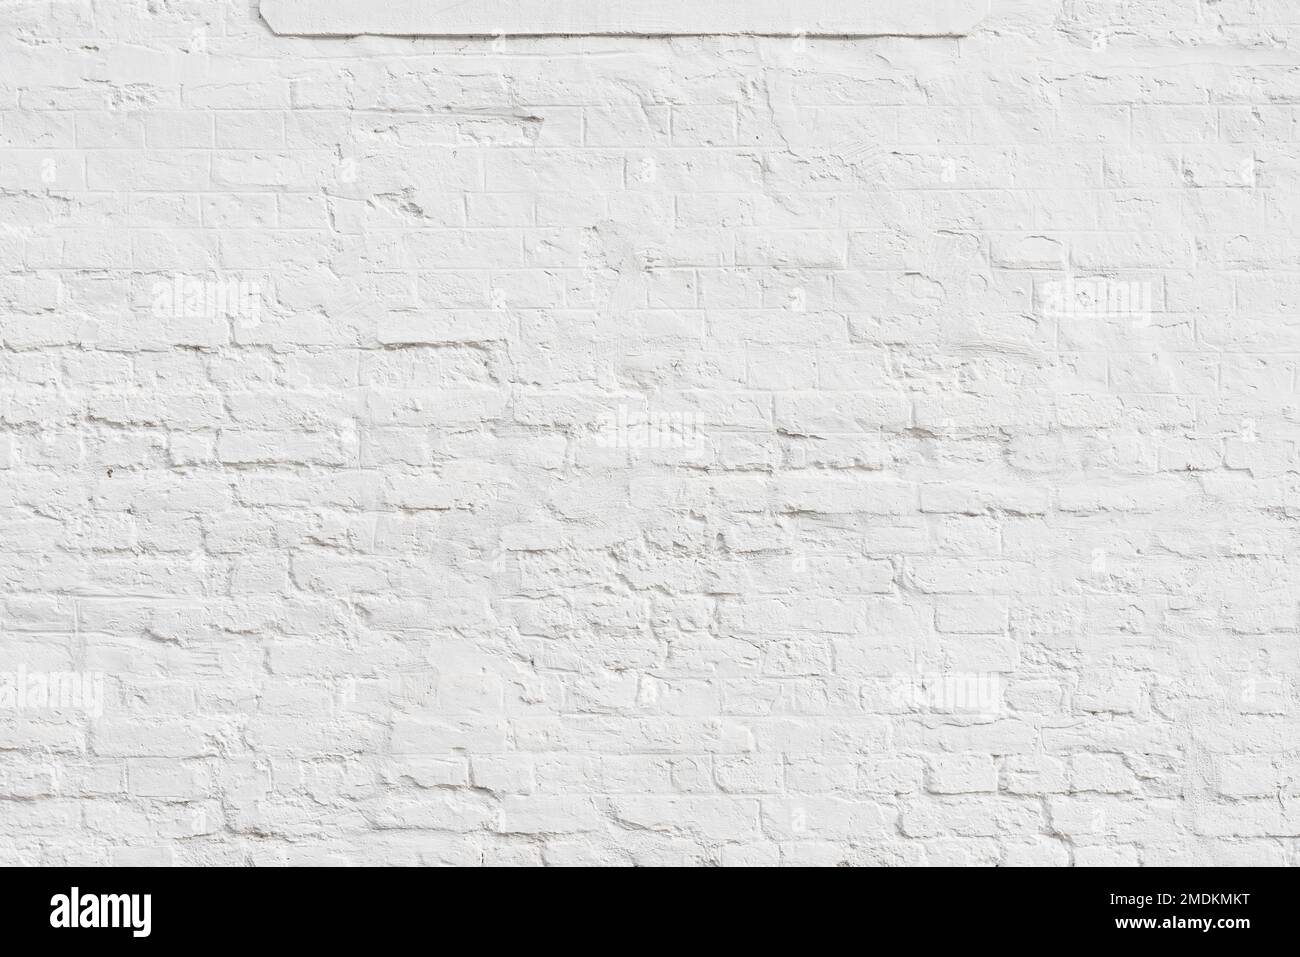 Old plaster wall painted in white with brick pattern as background Stock Photo